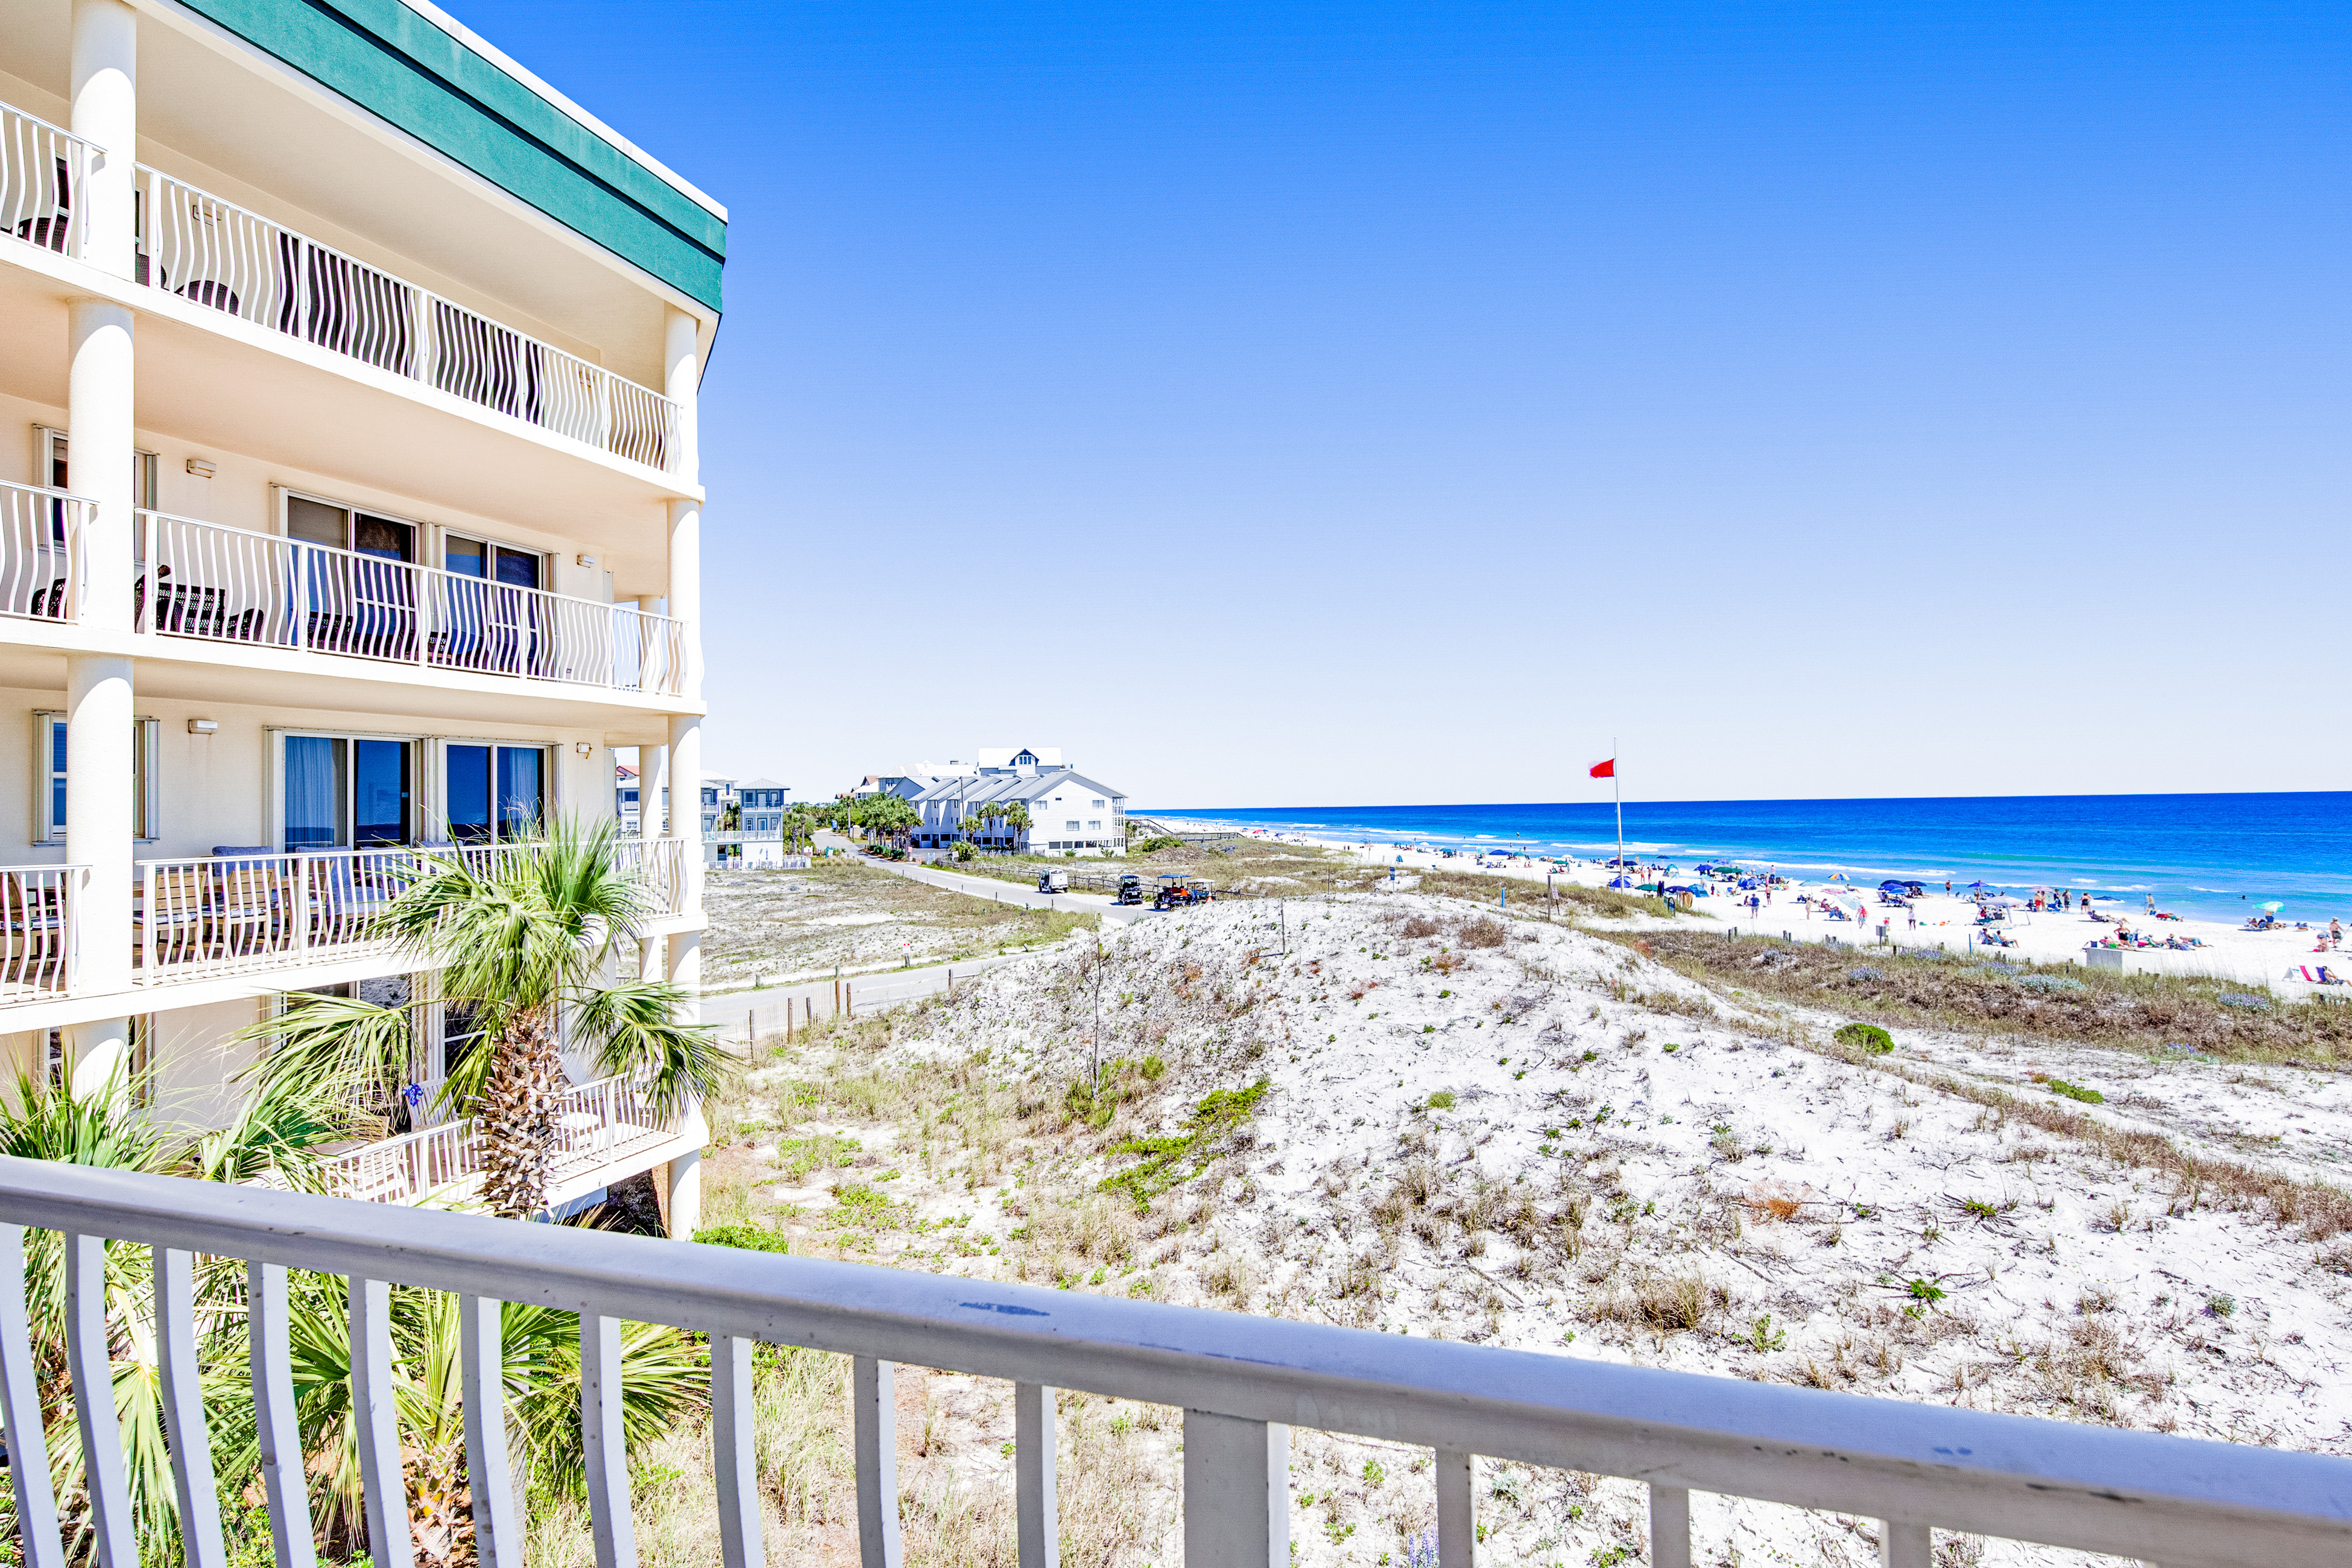 Dunes of Seagrove A210 Condo rental in Dunes of Seagrove in Highway 30-A Florida - #29